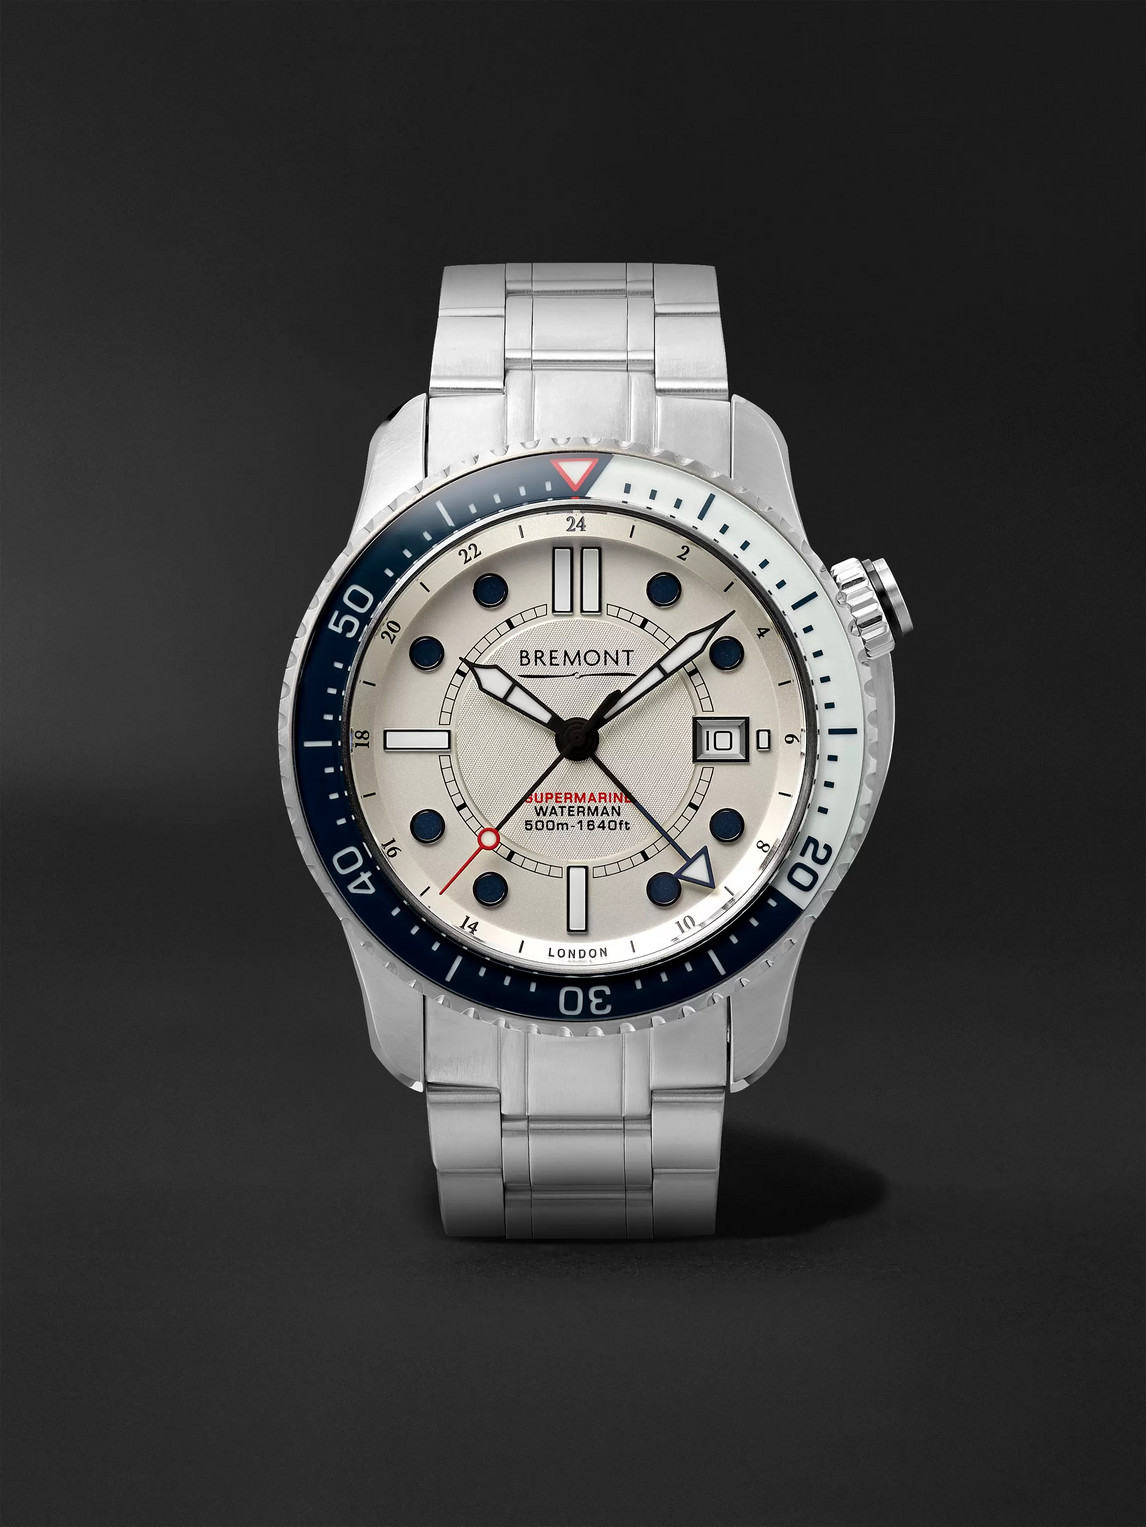 Bremont Supermarine Waterman Limited Edition Automatic 43mm Stainless Steel Watch, Ref. No. S500/waterman In White